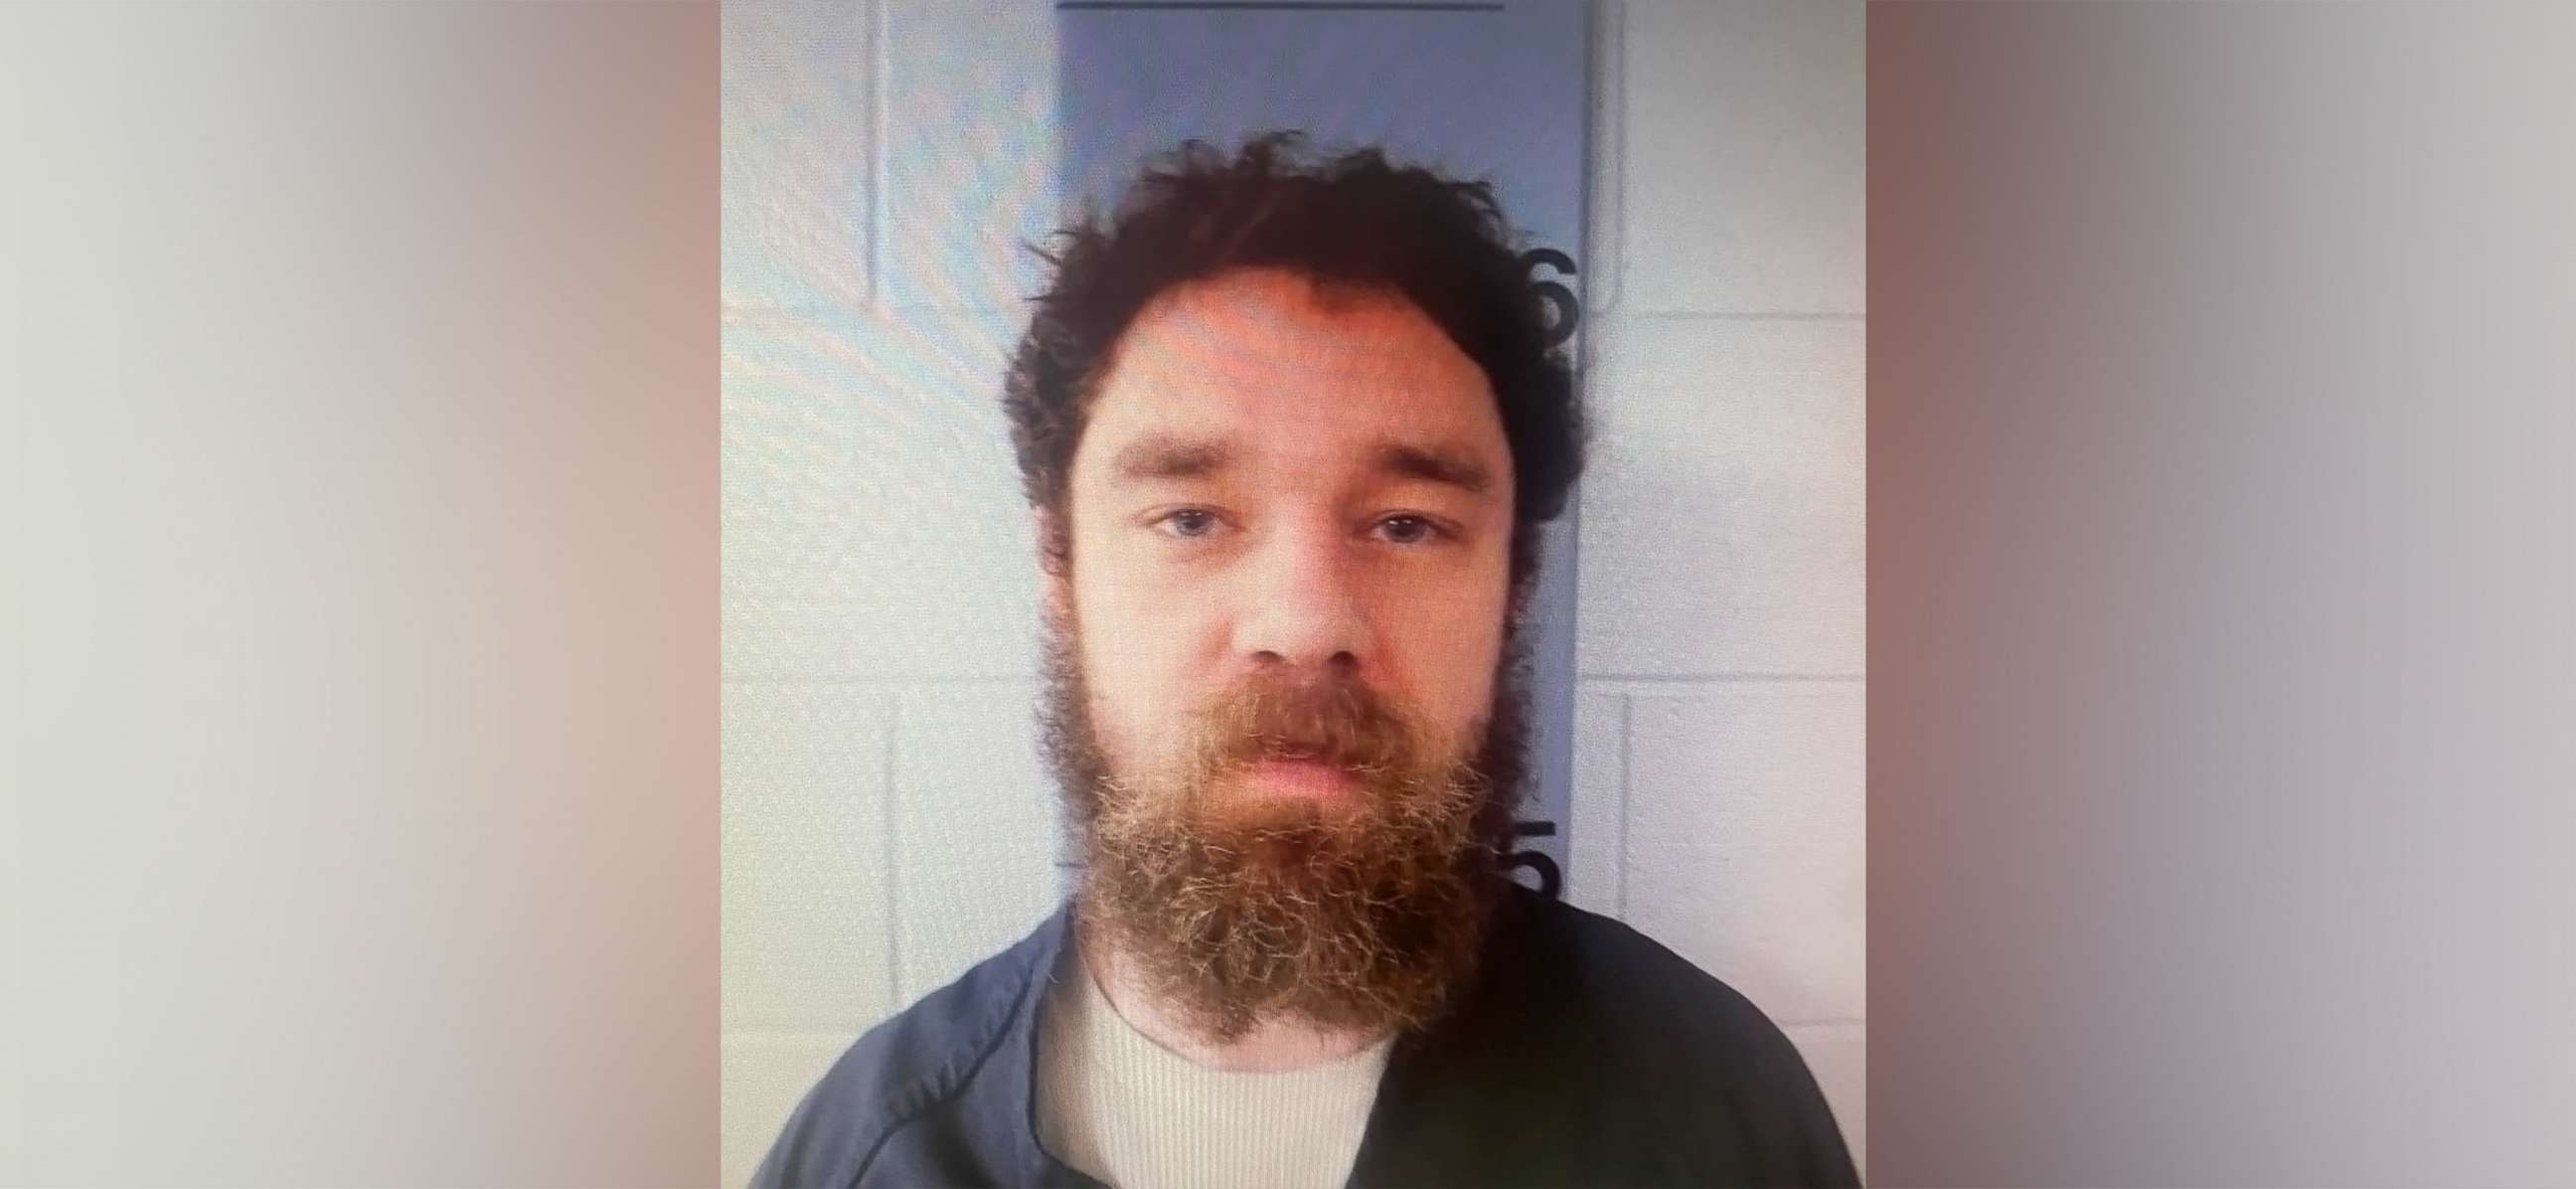 PHOTO: Matthew Crawford, an escaped inmate from Barry County Jail in Cassville, Missouri, is pictured in an mage released by law enforcements.